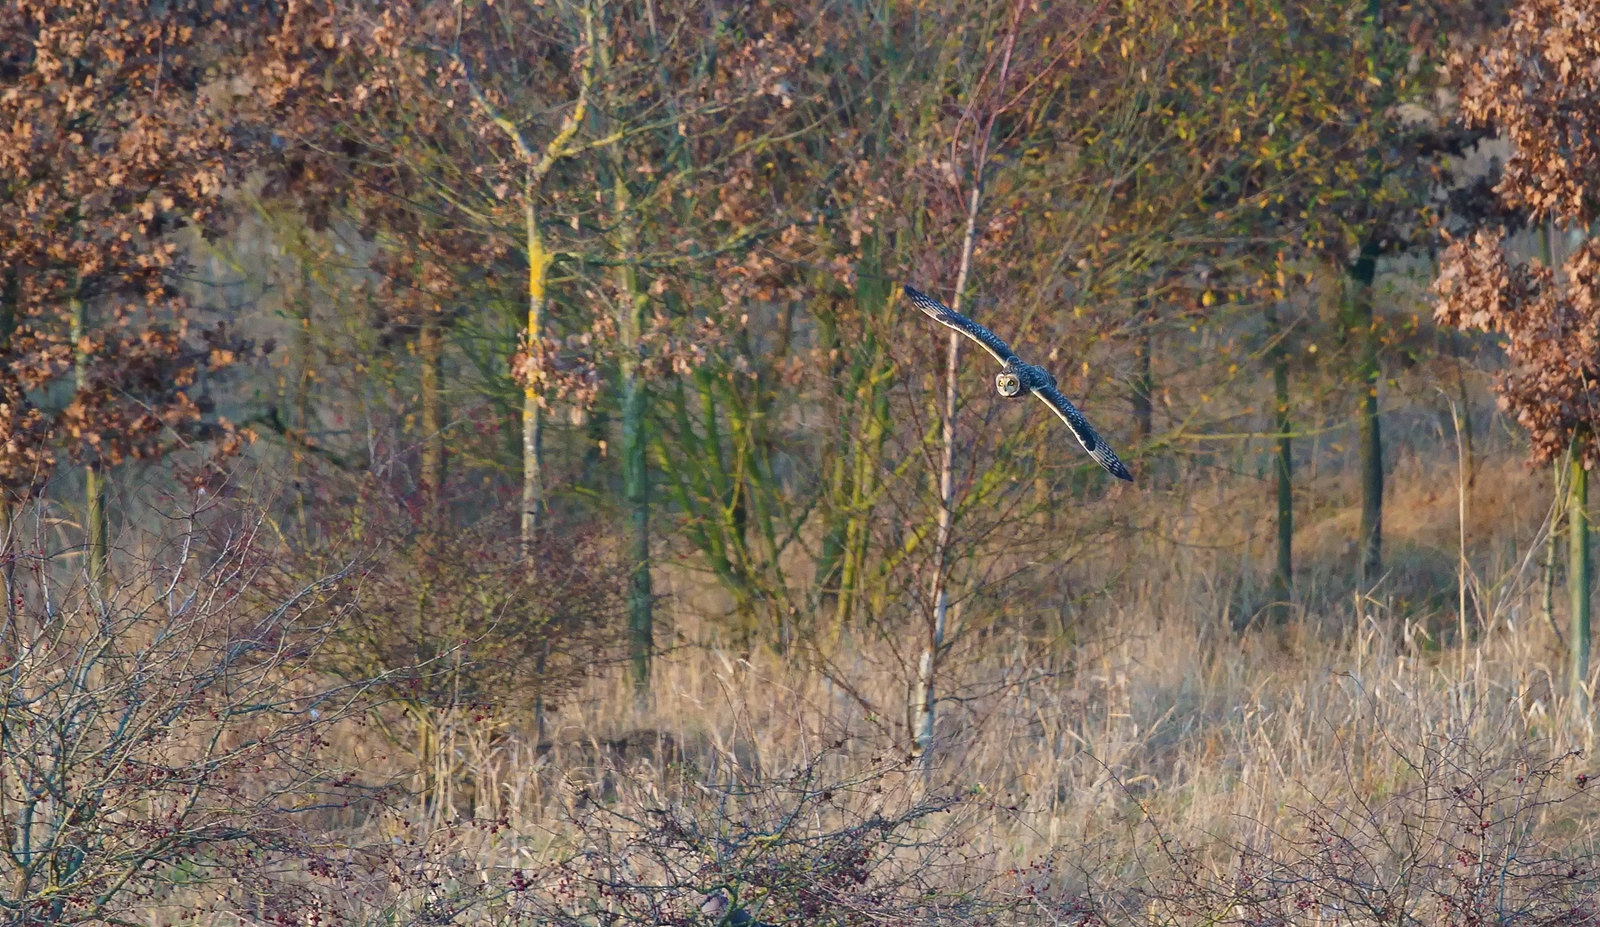 SE Owl/s - always distant, but interesting in the evening light...